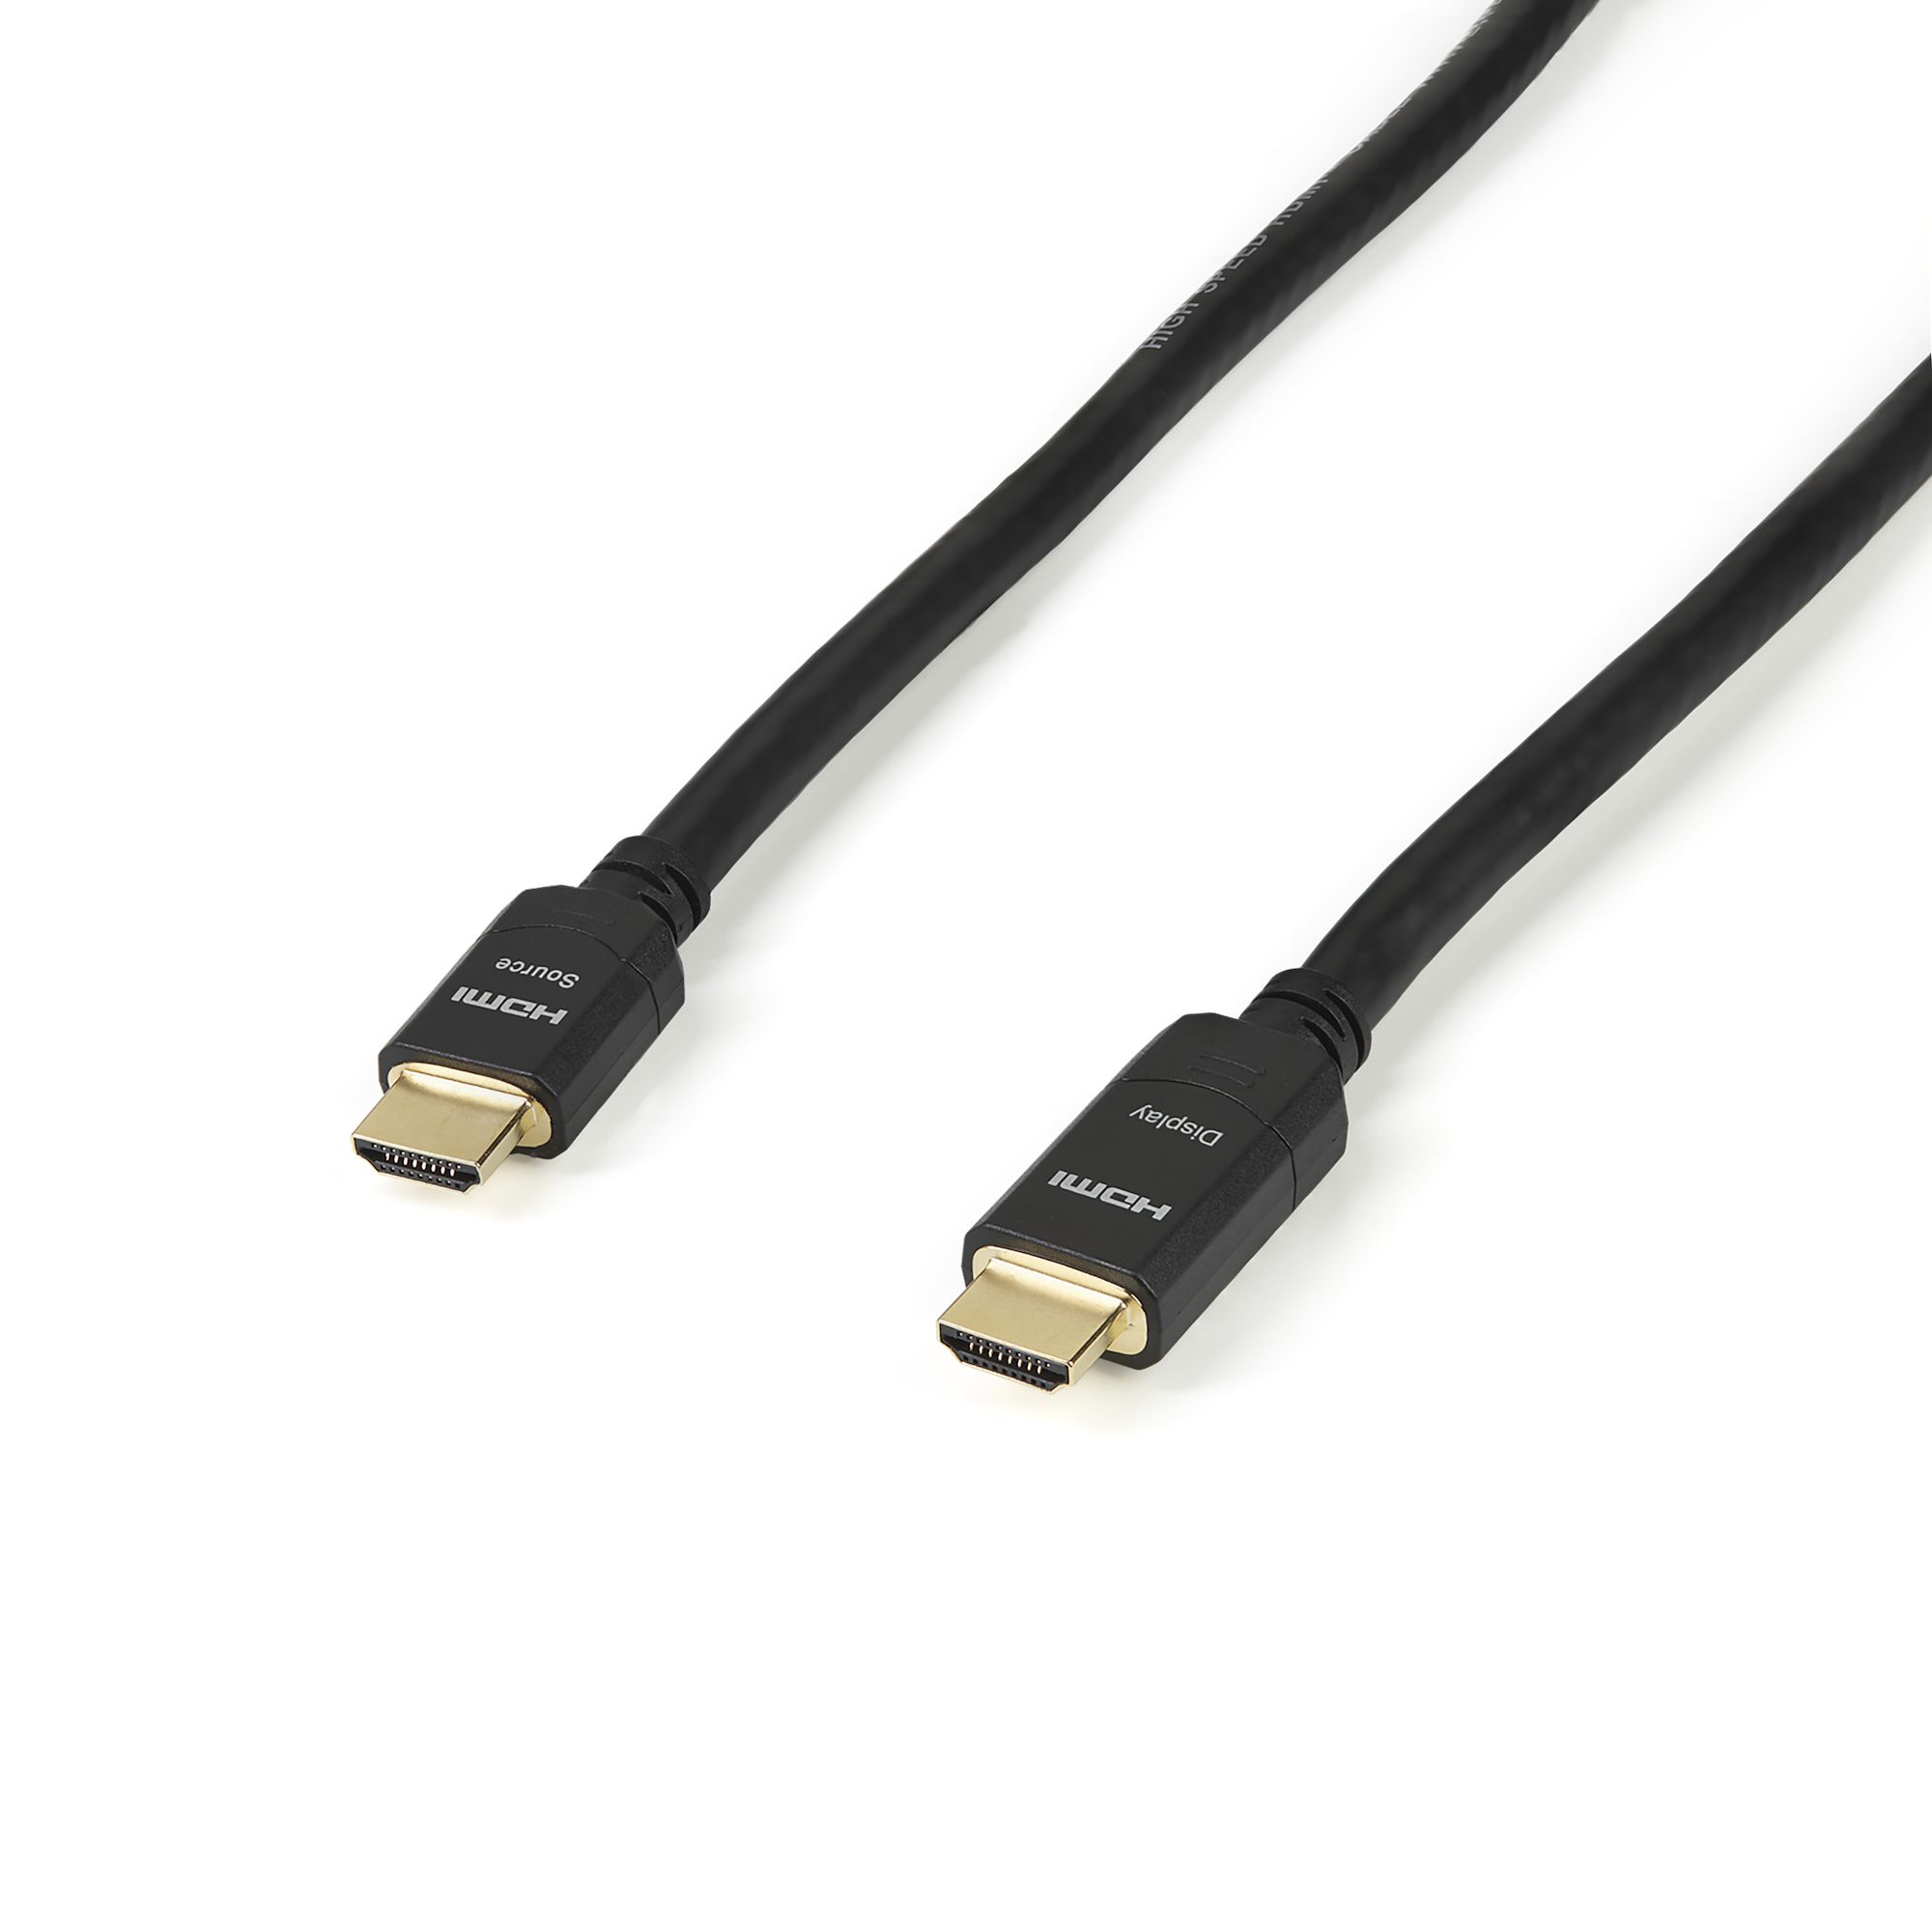 【HDMM30MA】HIGH SPEED HDMI CABLE M/M - ACTI